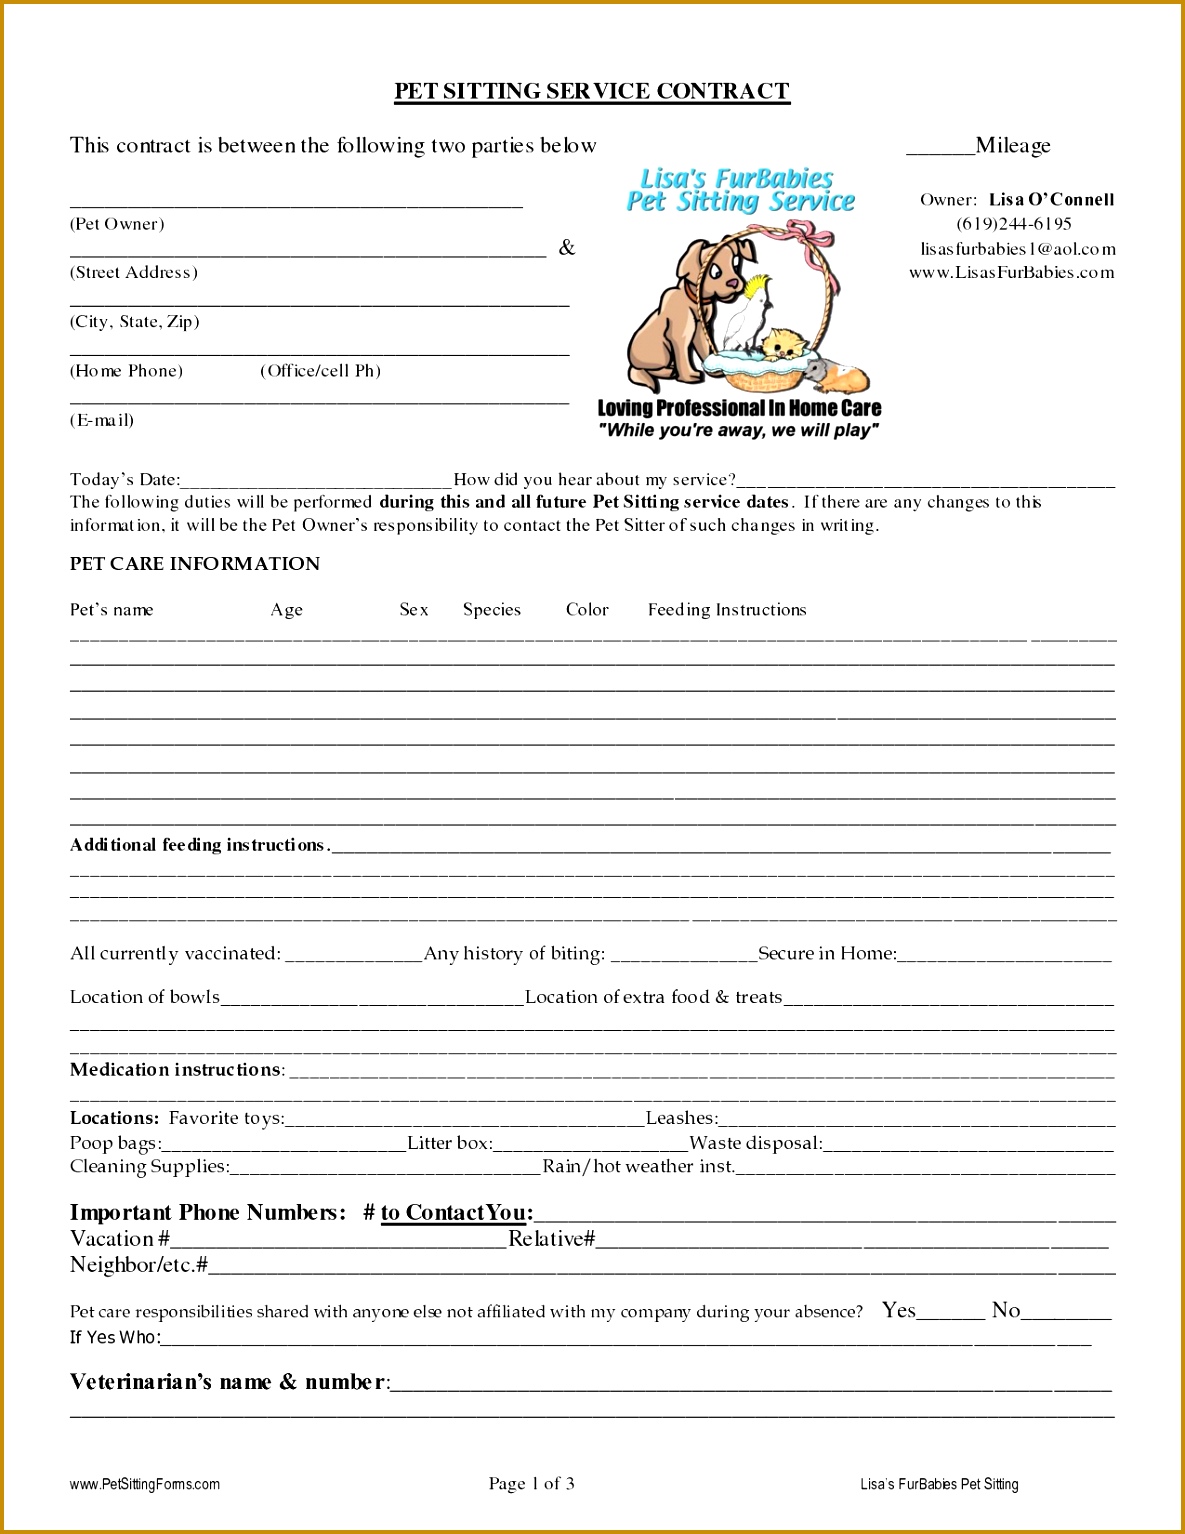 Pet Sitting Contract Templates 15341185